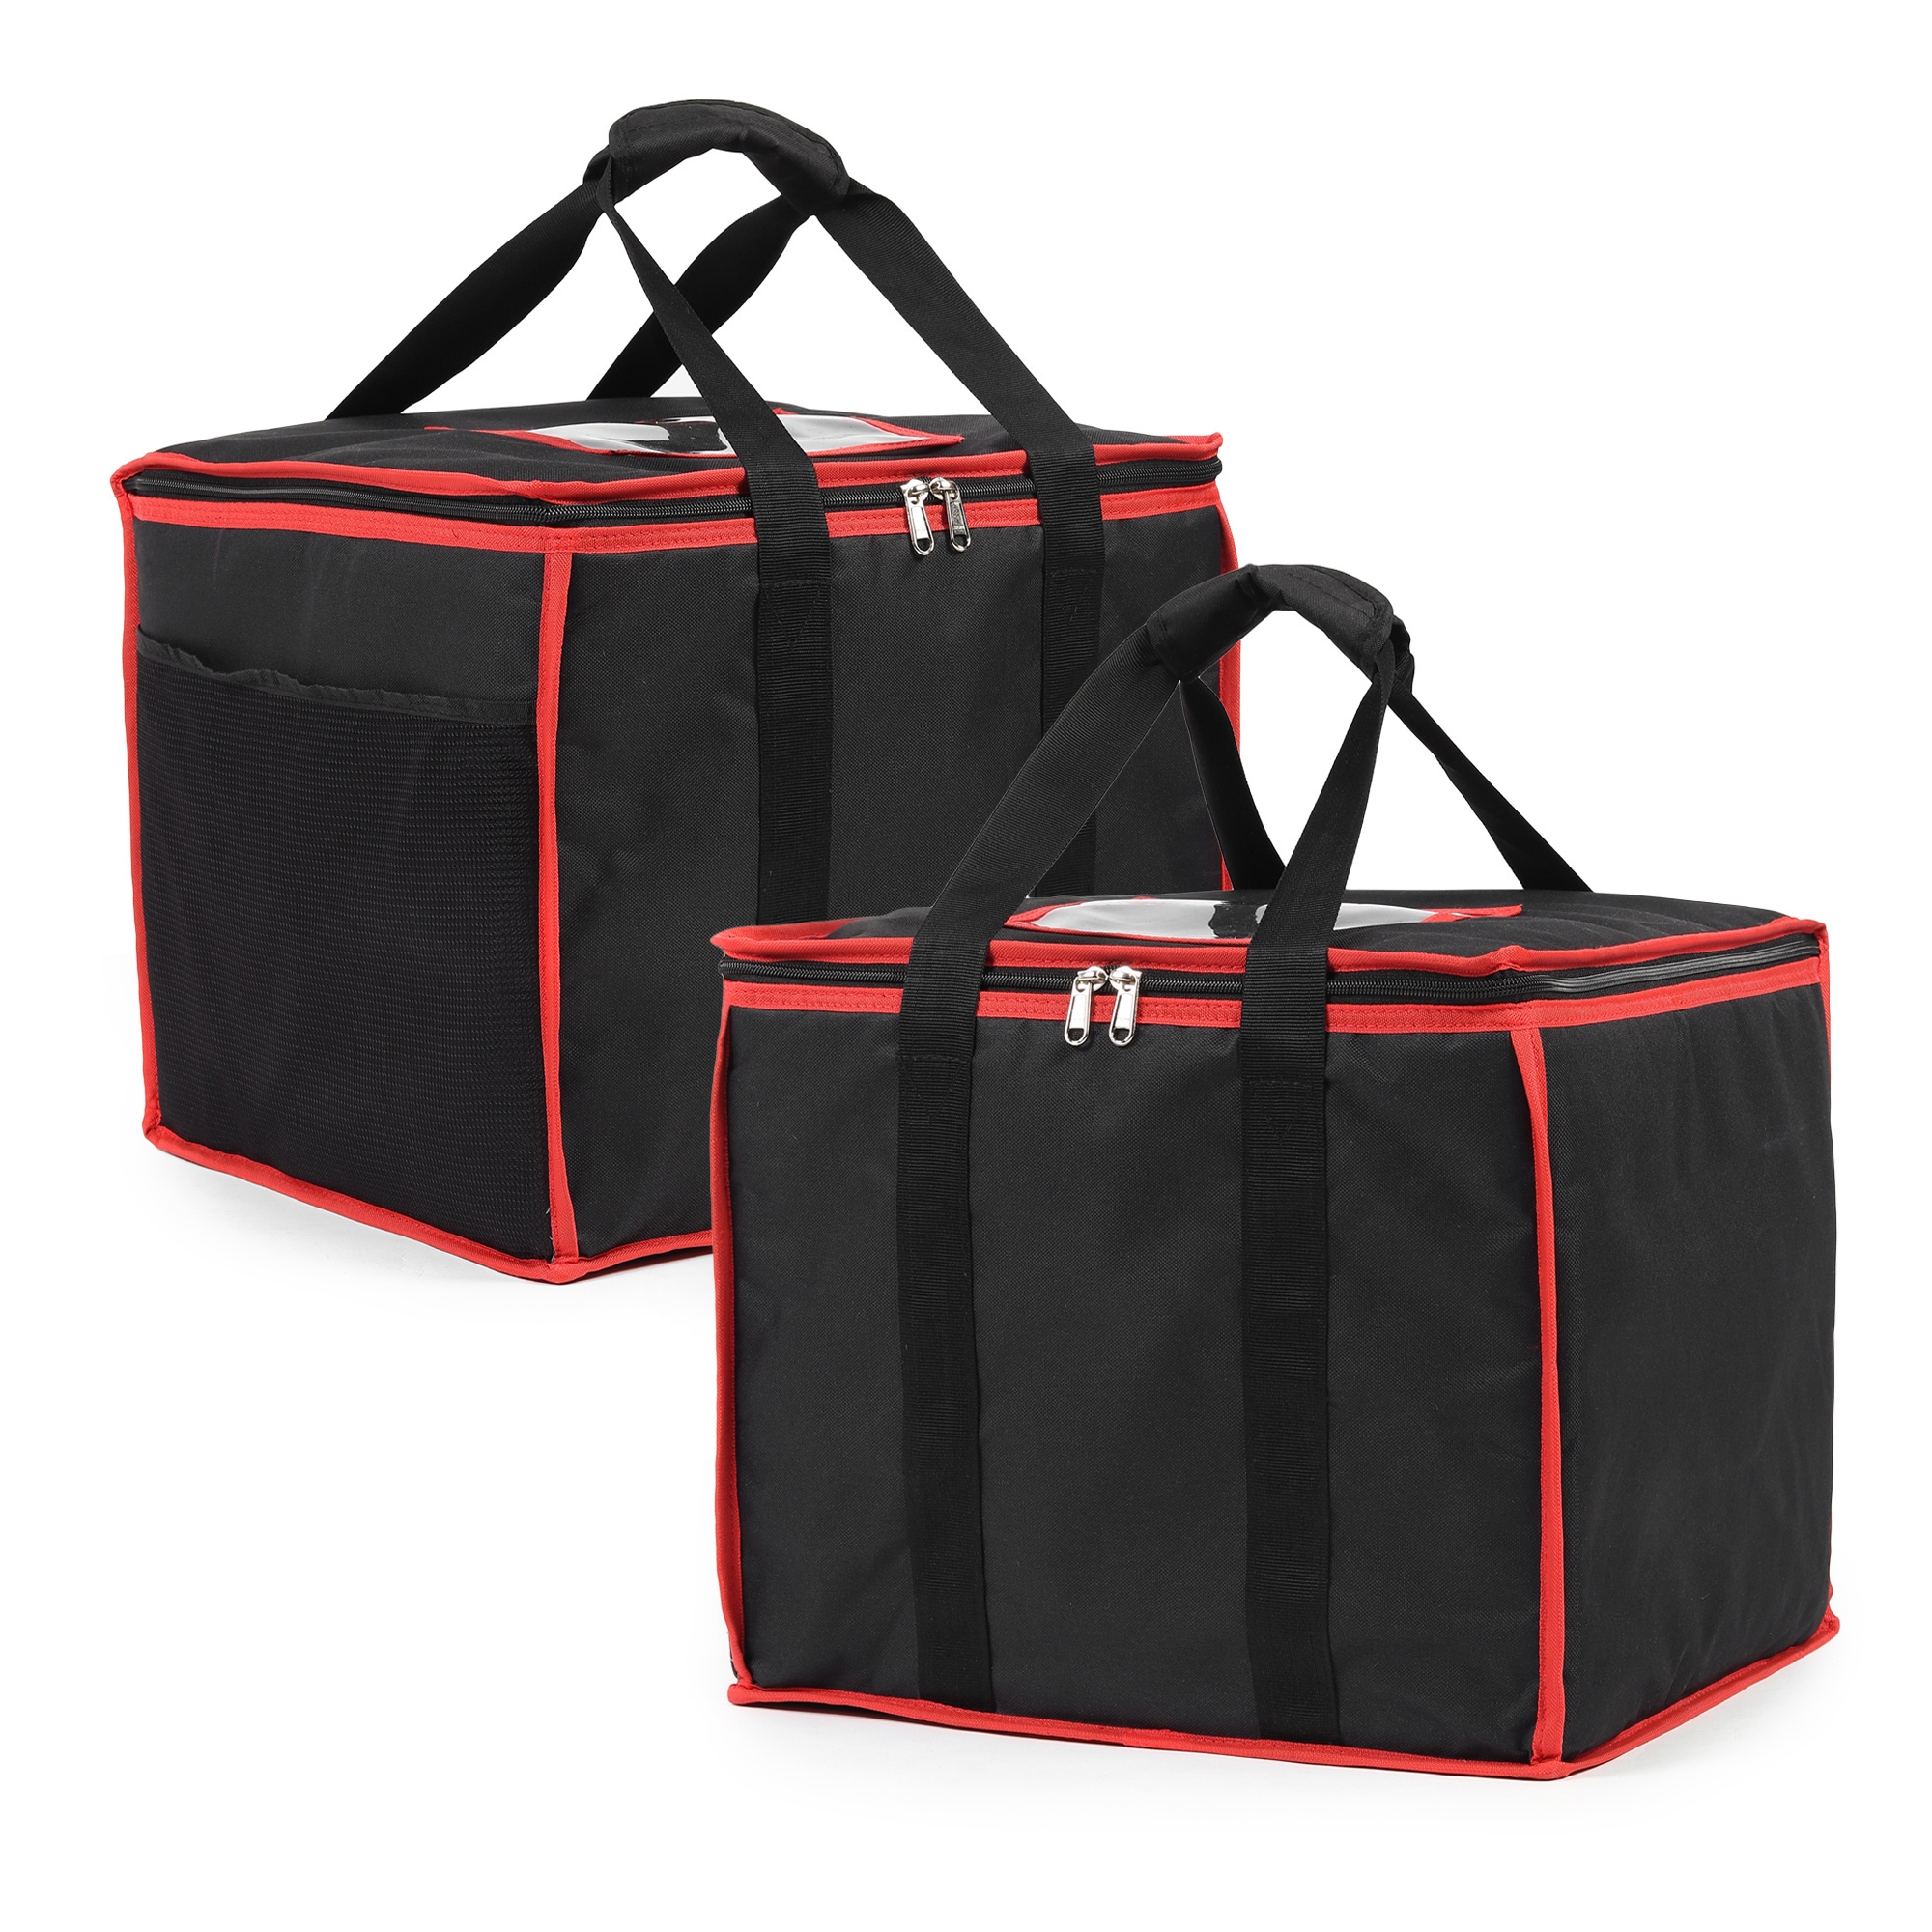 DOUBLE R BAGS Thermal Bags for Cold and hot Food Bag (Black)